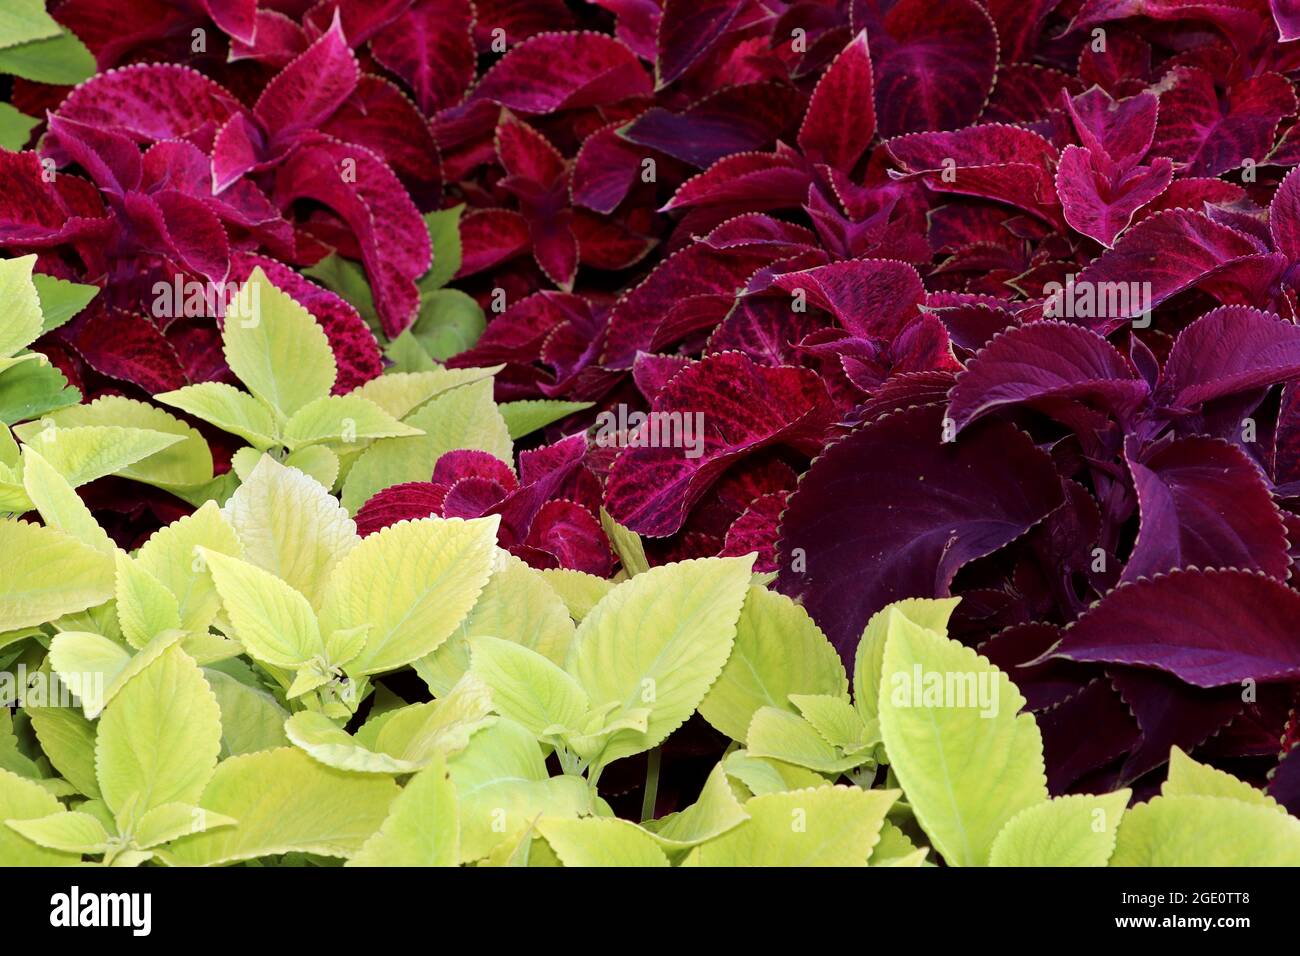 Plant with pink and green leaves close up. Pink and green plants in garden in macro style. Stock Photo